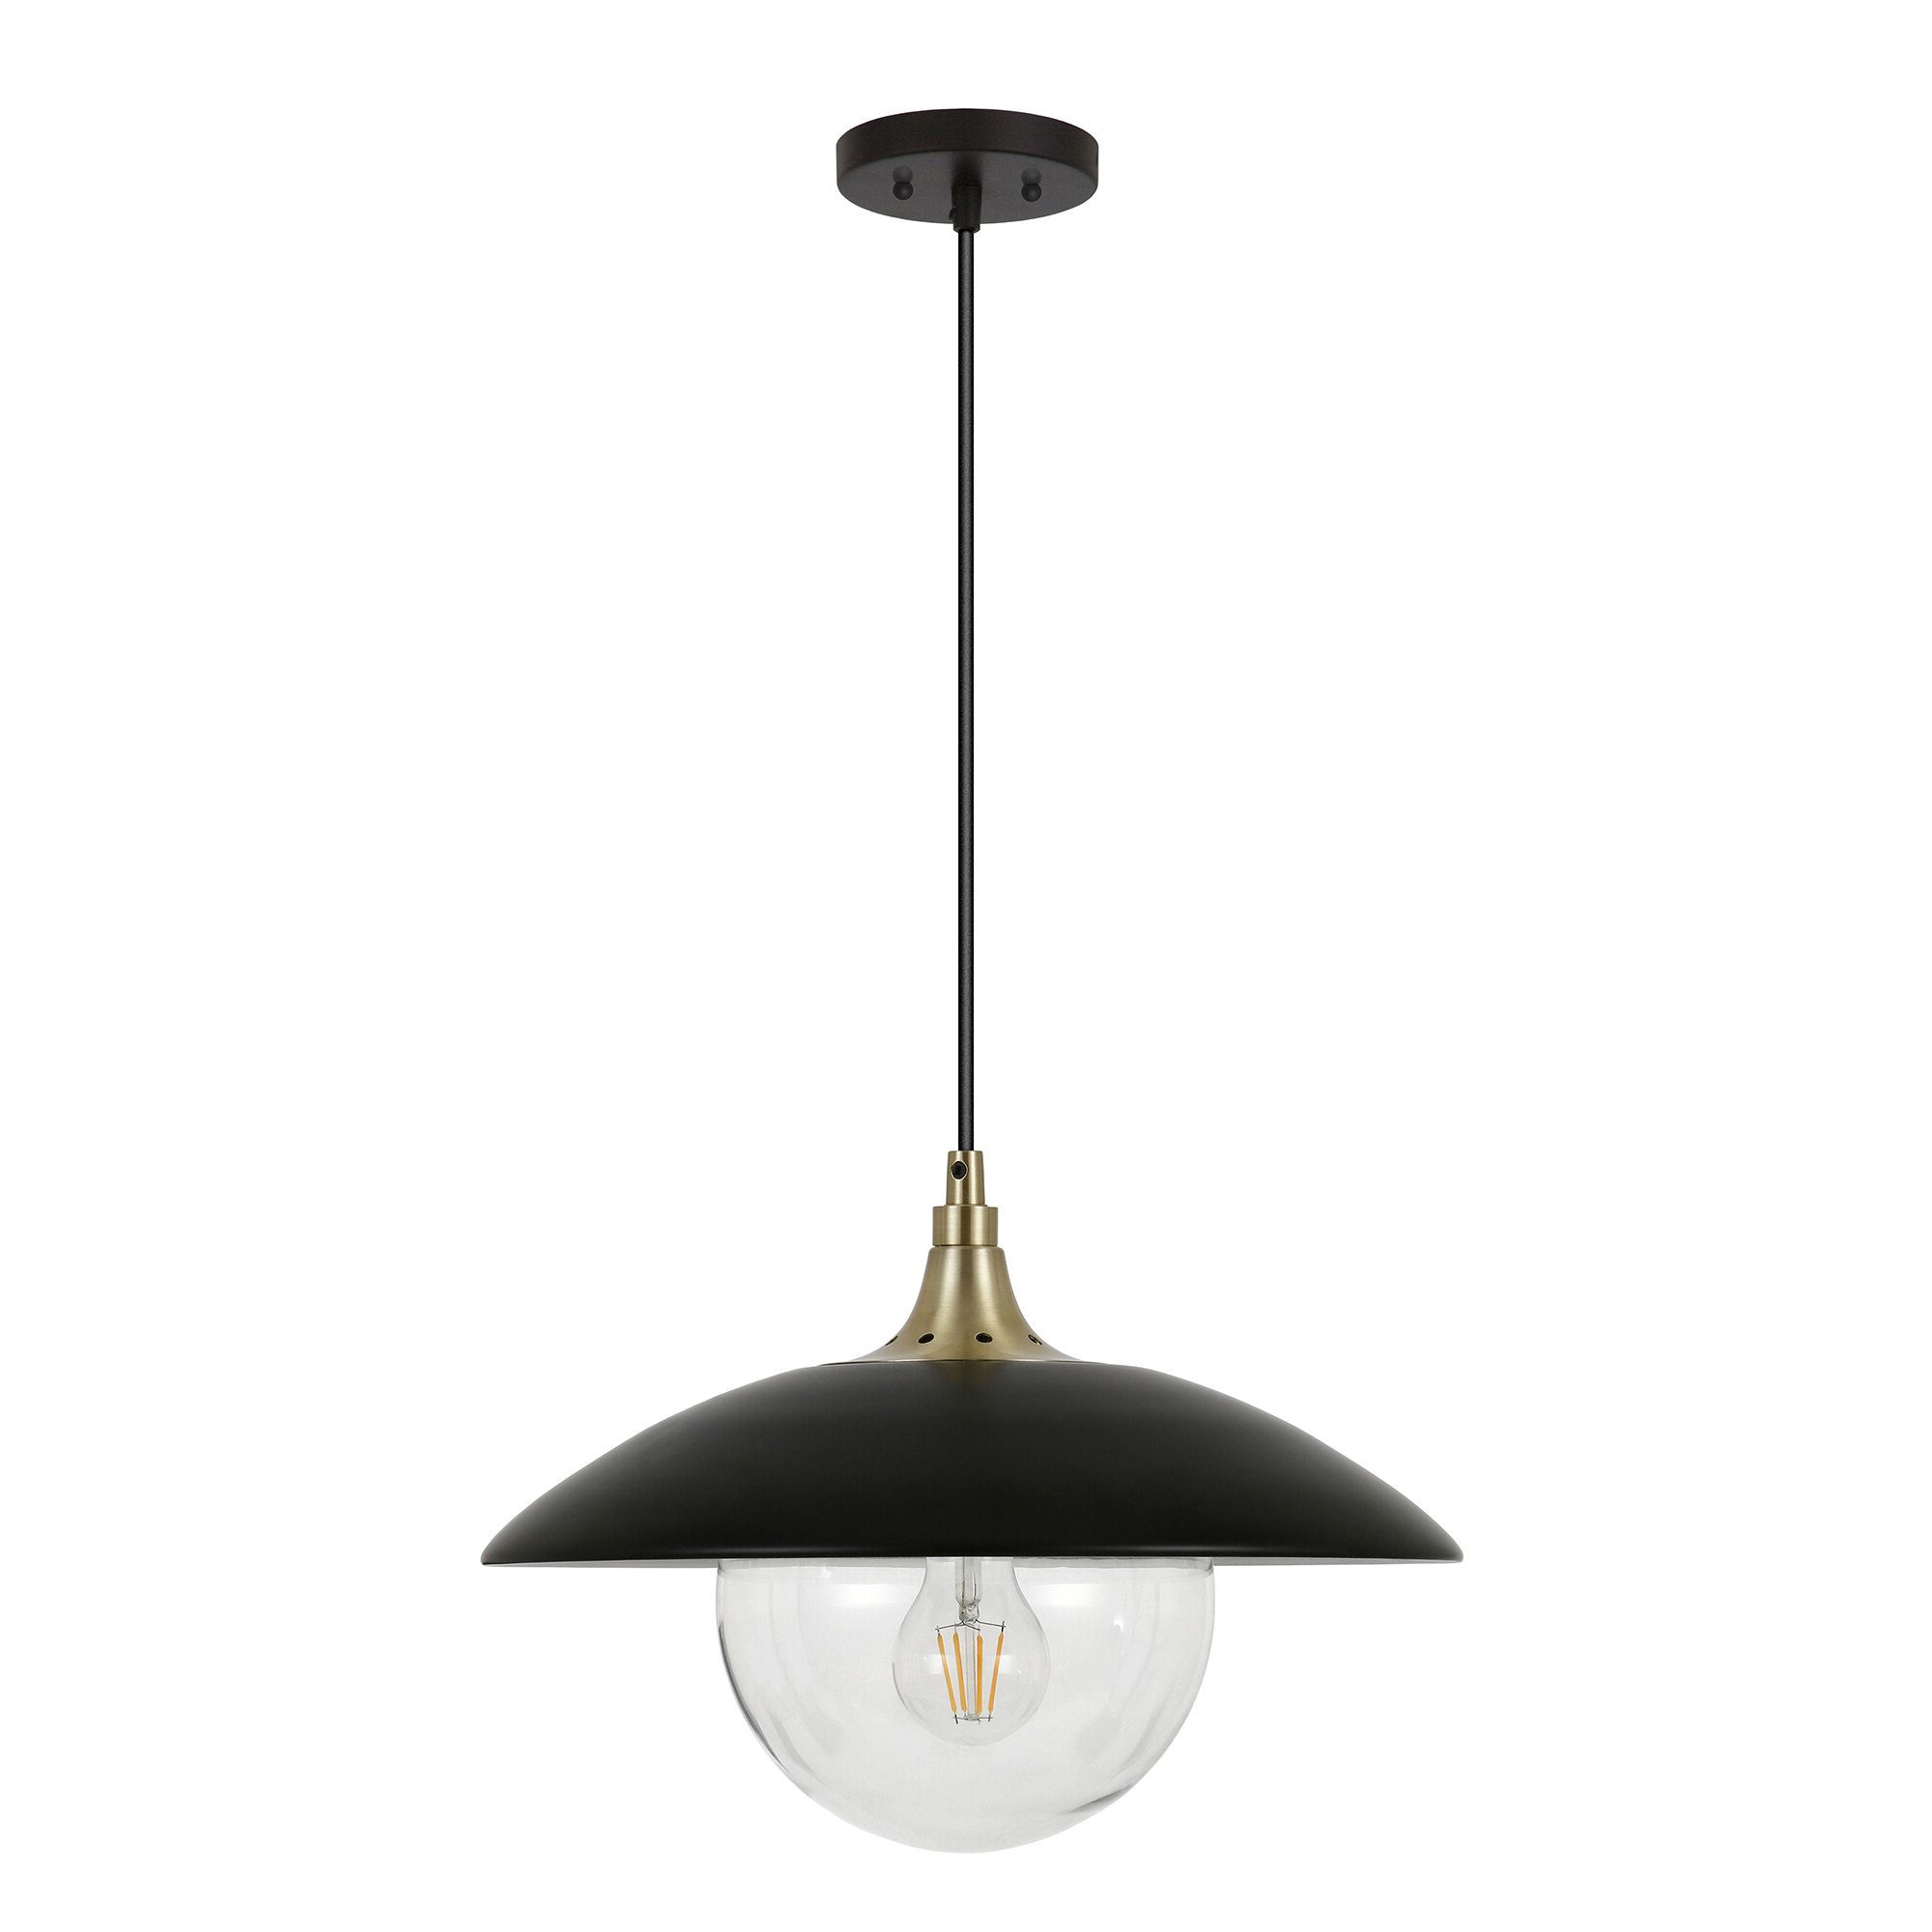 Adriana Black 1 Light Single Dome Pendants With Regard To Well Known Deveraux 1 Light Single Dome Pendant (View 1 of 20)